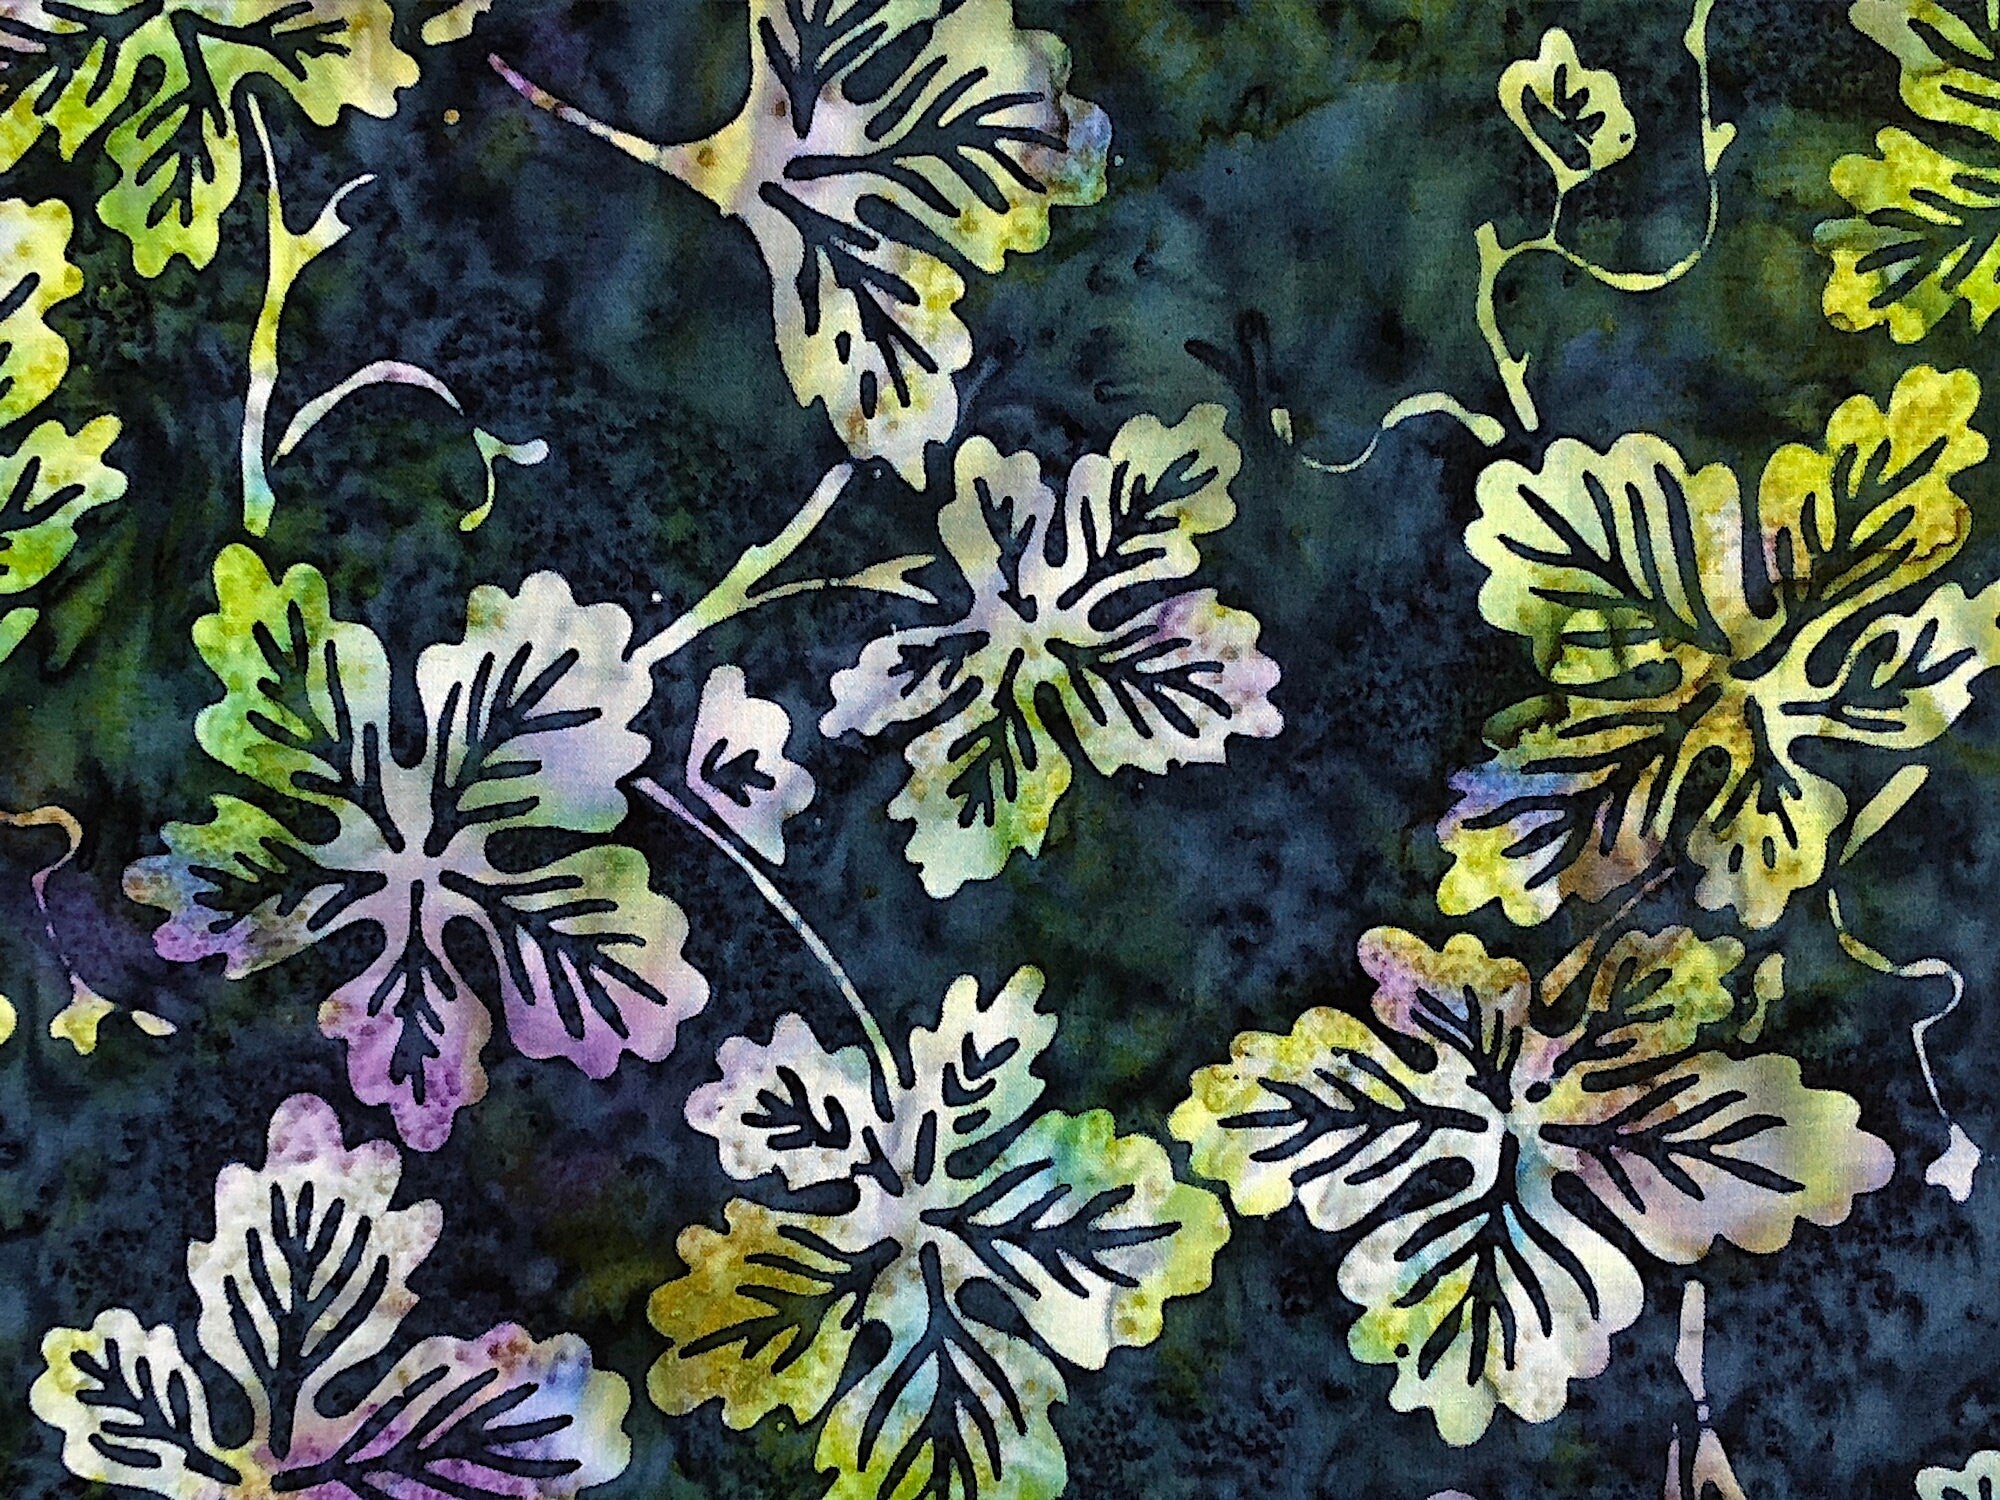 Close up of leaves that are shades of white, blue and yellow on a blue batik background.